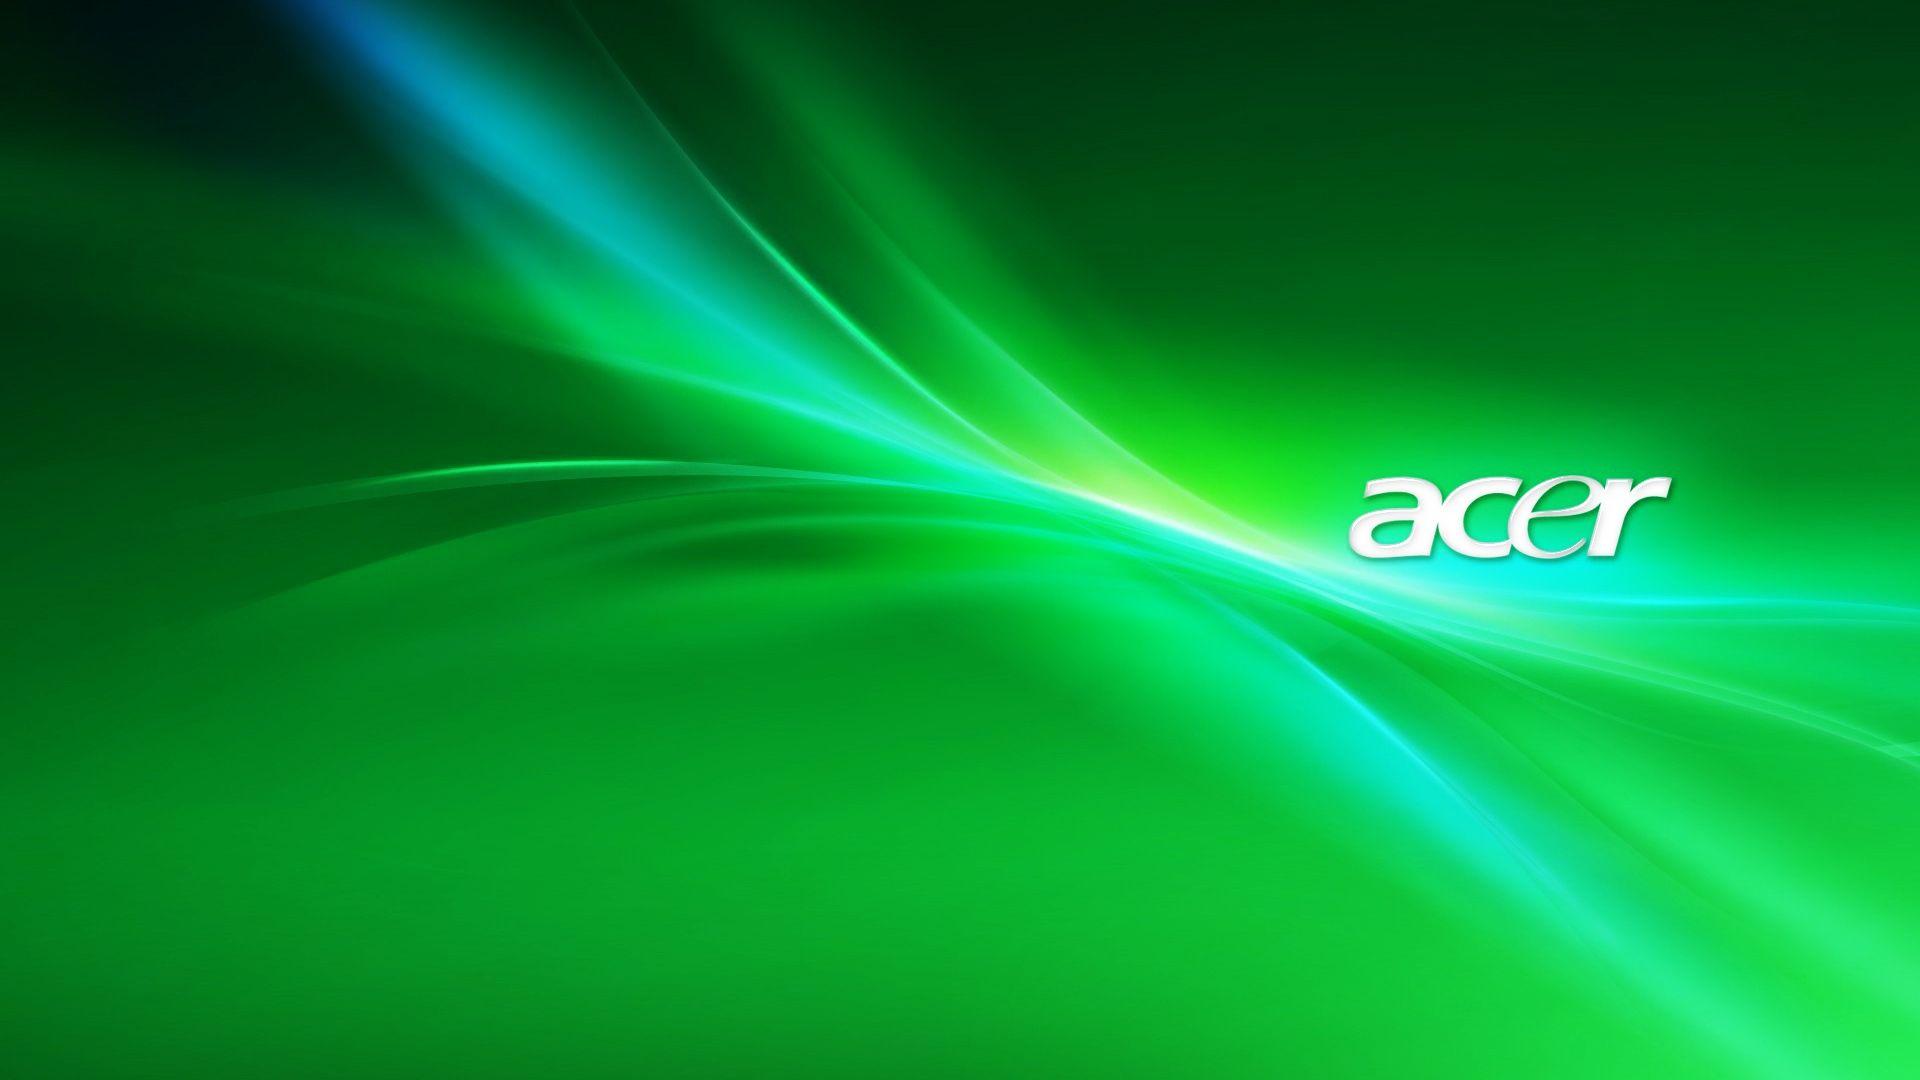 Acer Laptop Windows 8 and 8.1 Theme. All for Windows 10 Free